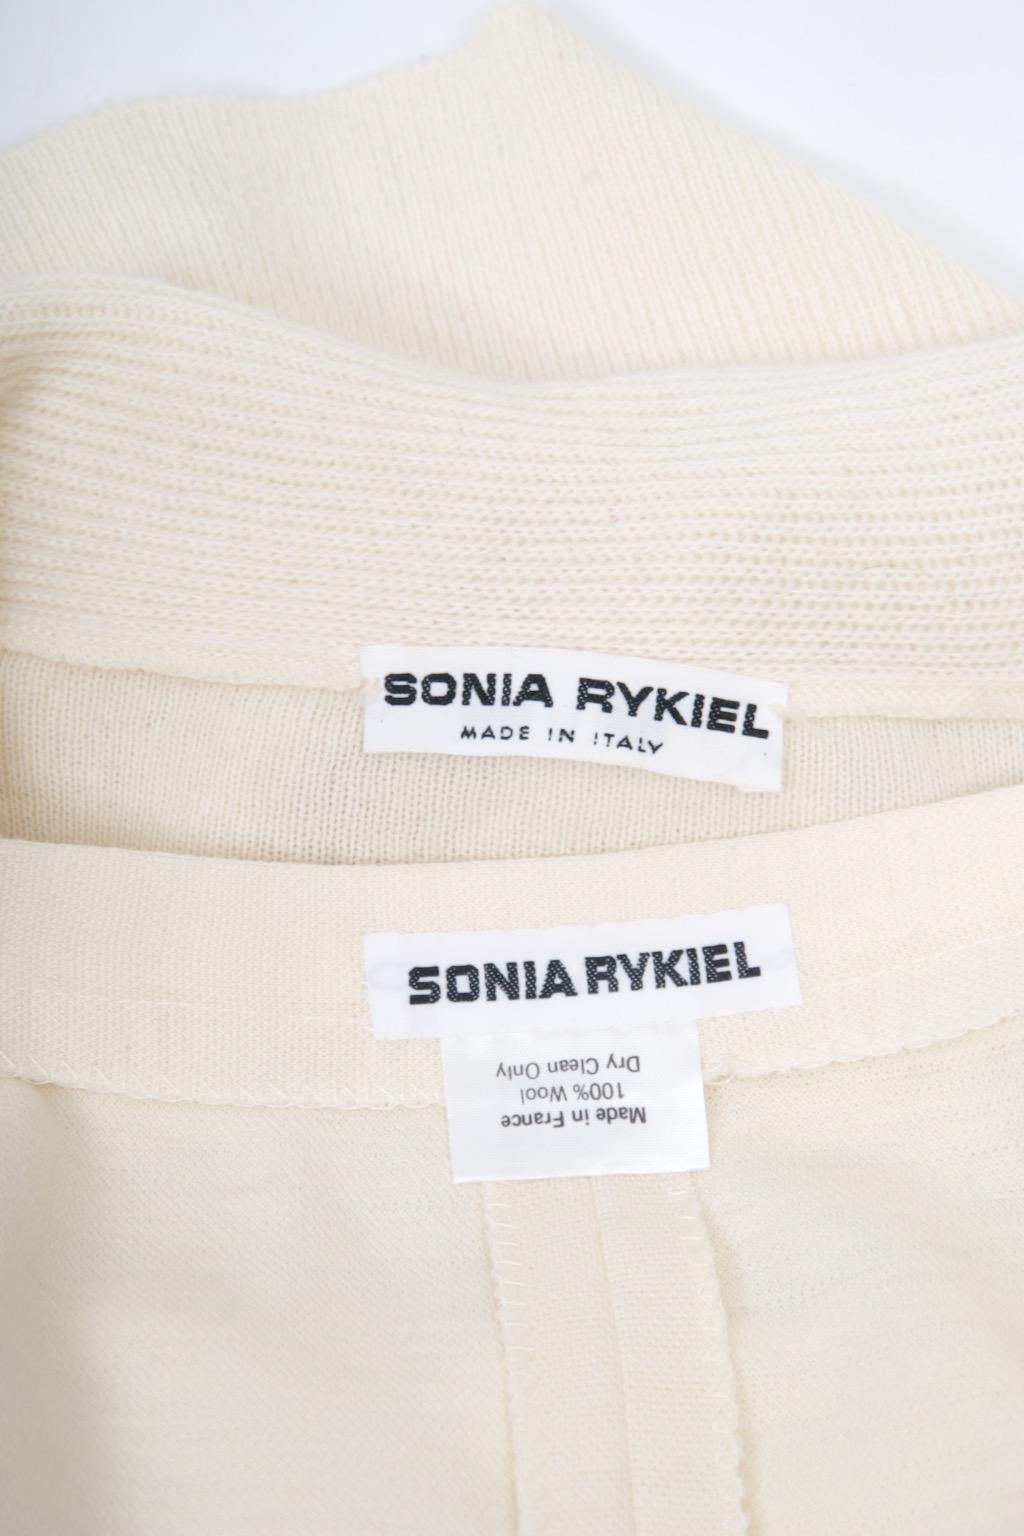 Sonia Rykiel Ivory Sweater and Skirt Ensemble For Sale 9